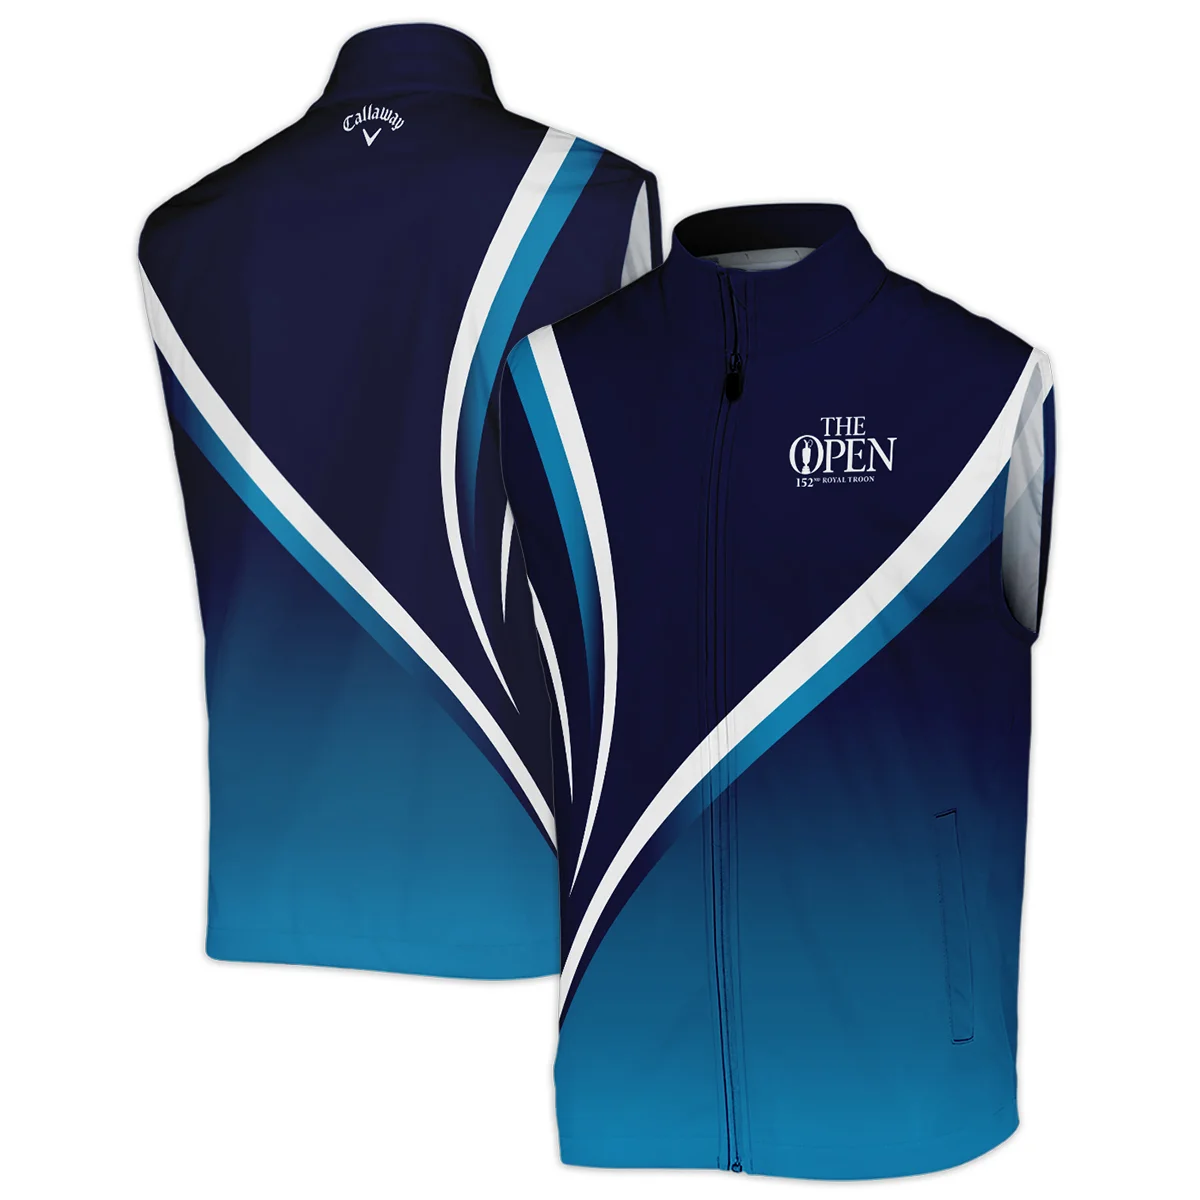 Callaway 152nd Open Championship Dark Blue Gradient White Abstract Background Performance Quarter Zip Sweatshirt With Pockets All Over Prints HOTOP260624A03CLWTS